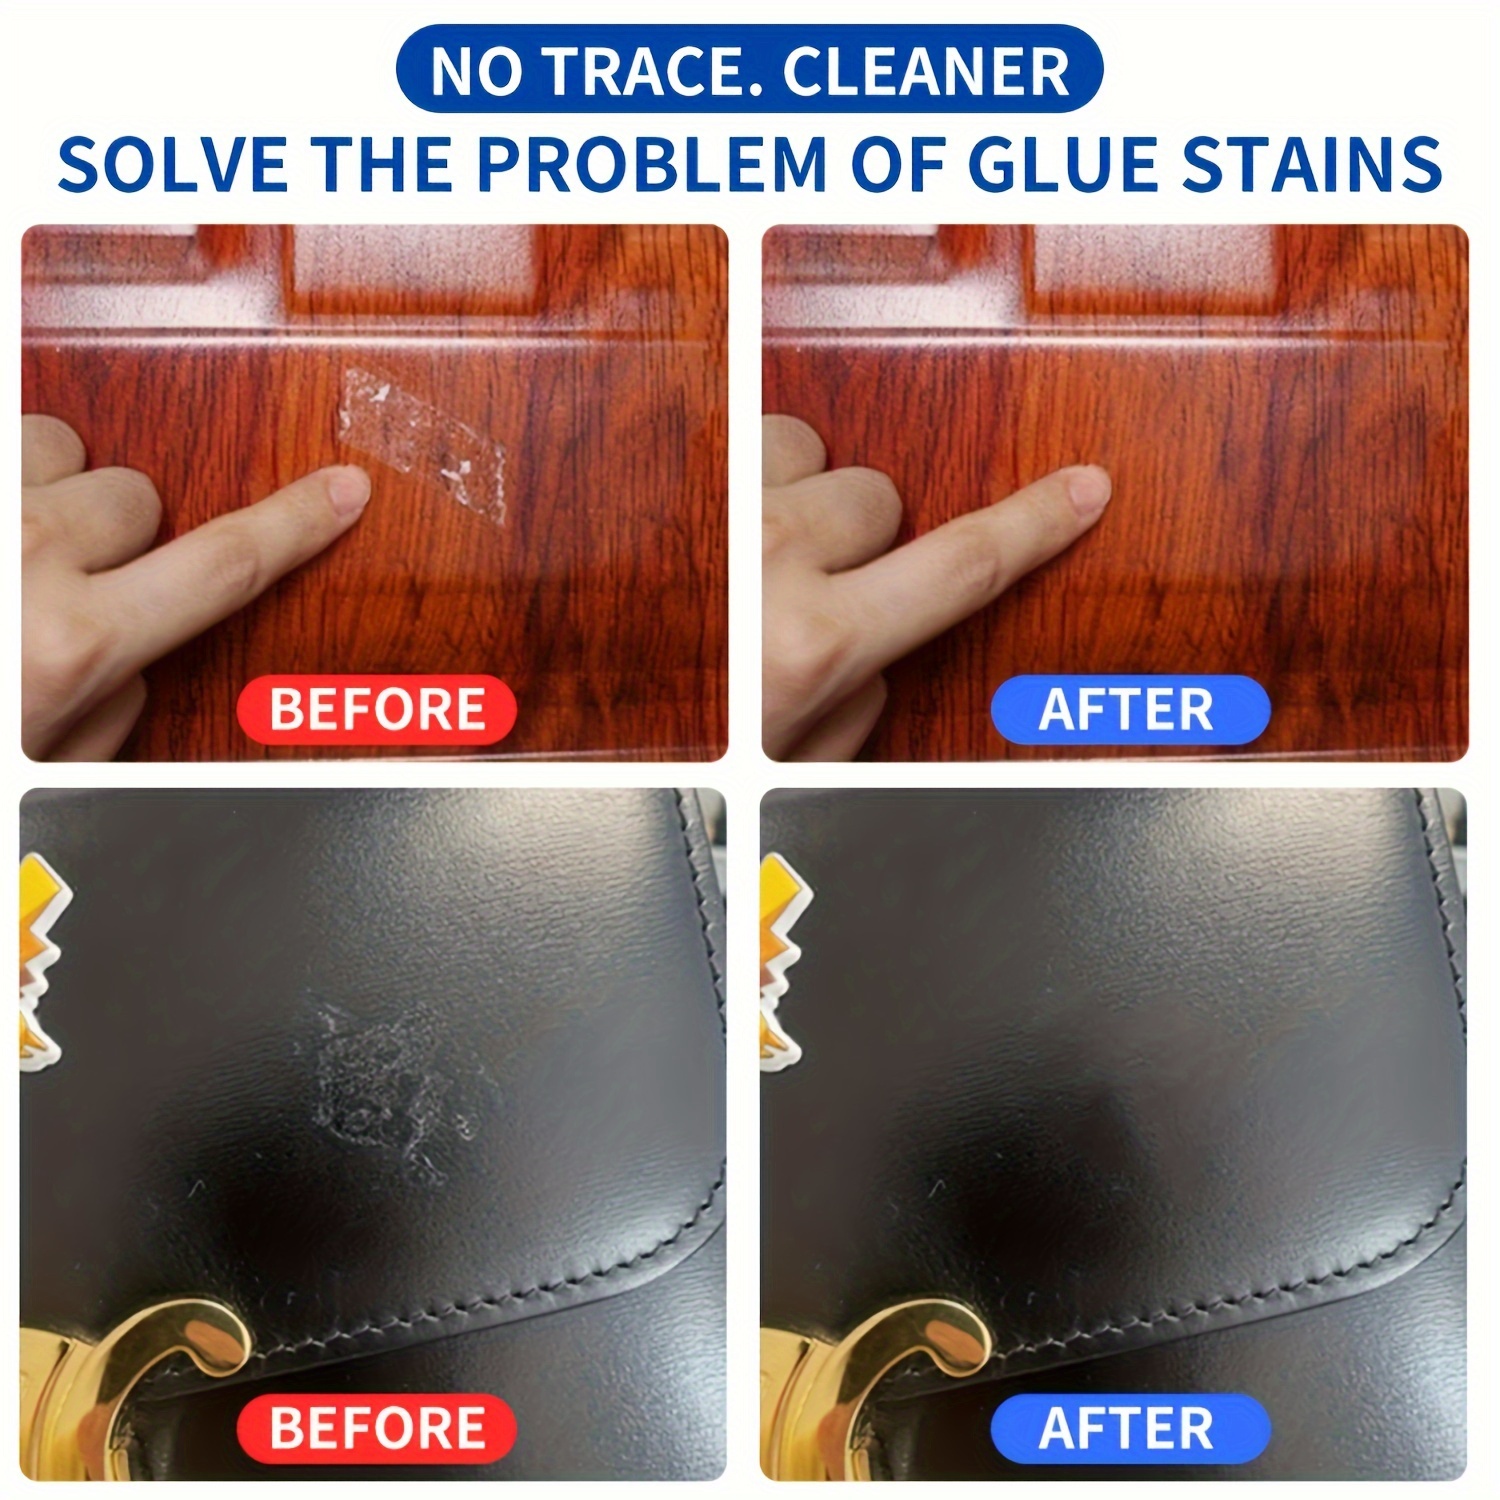 How to Remove Glue and Adhesive Stains From Wood